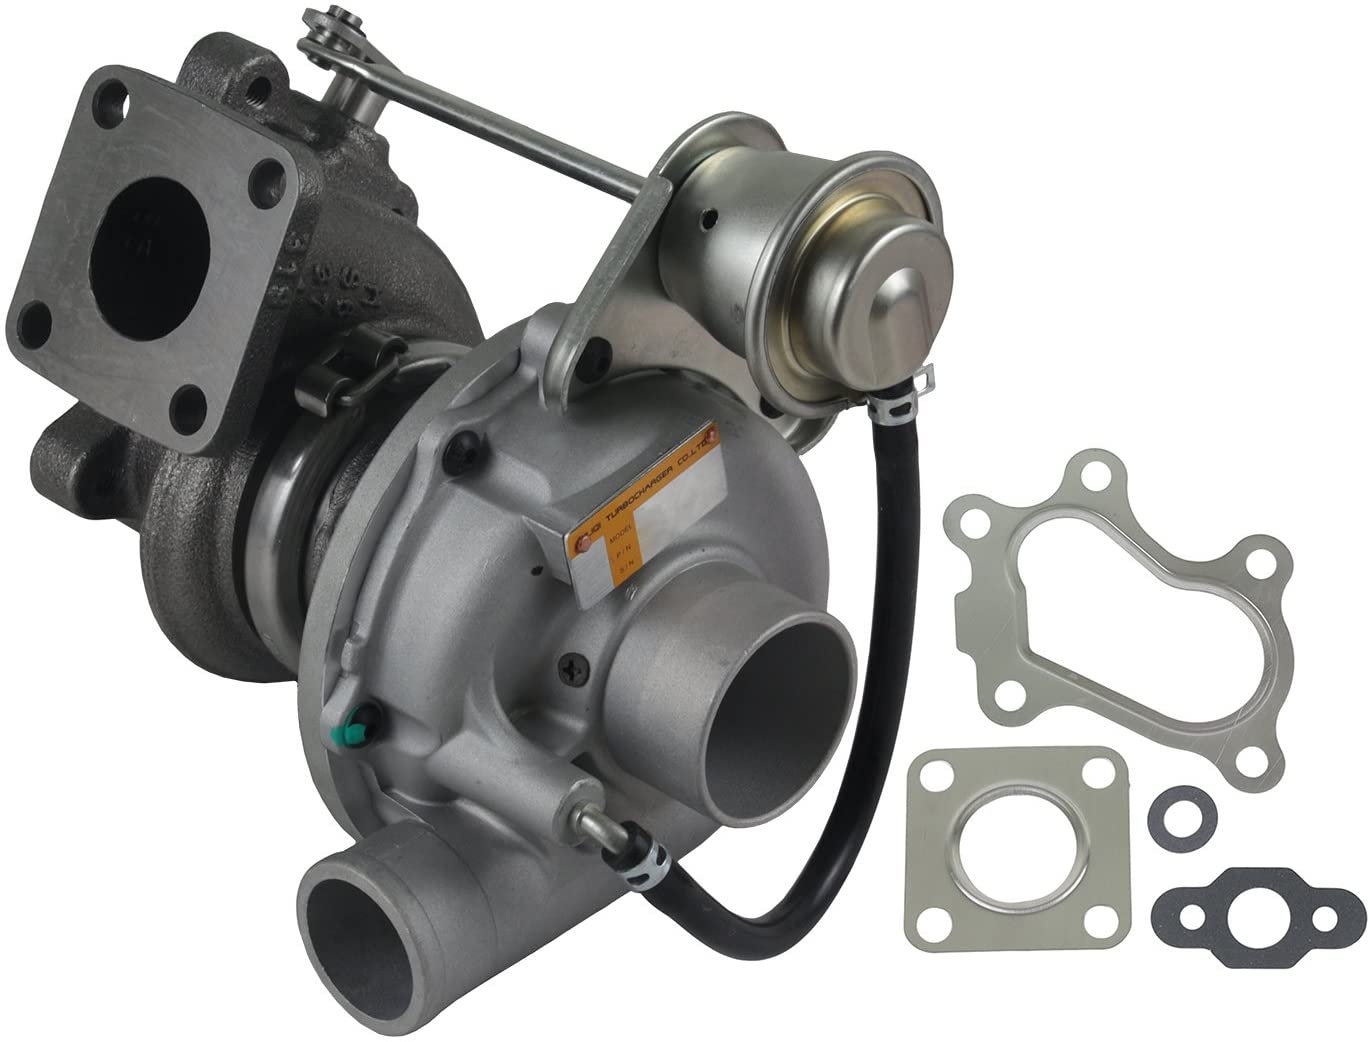 Rareelectrical NEW TURBO CHARGER COMPATIBLE WITH CATERPILLAR SKID STEER 216B 226B 0104-890-012 13575-6180